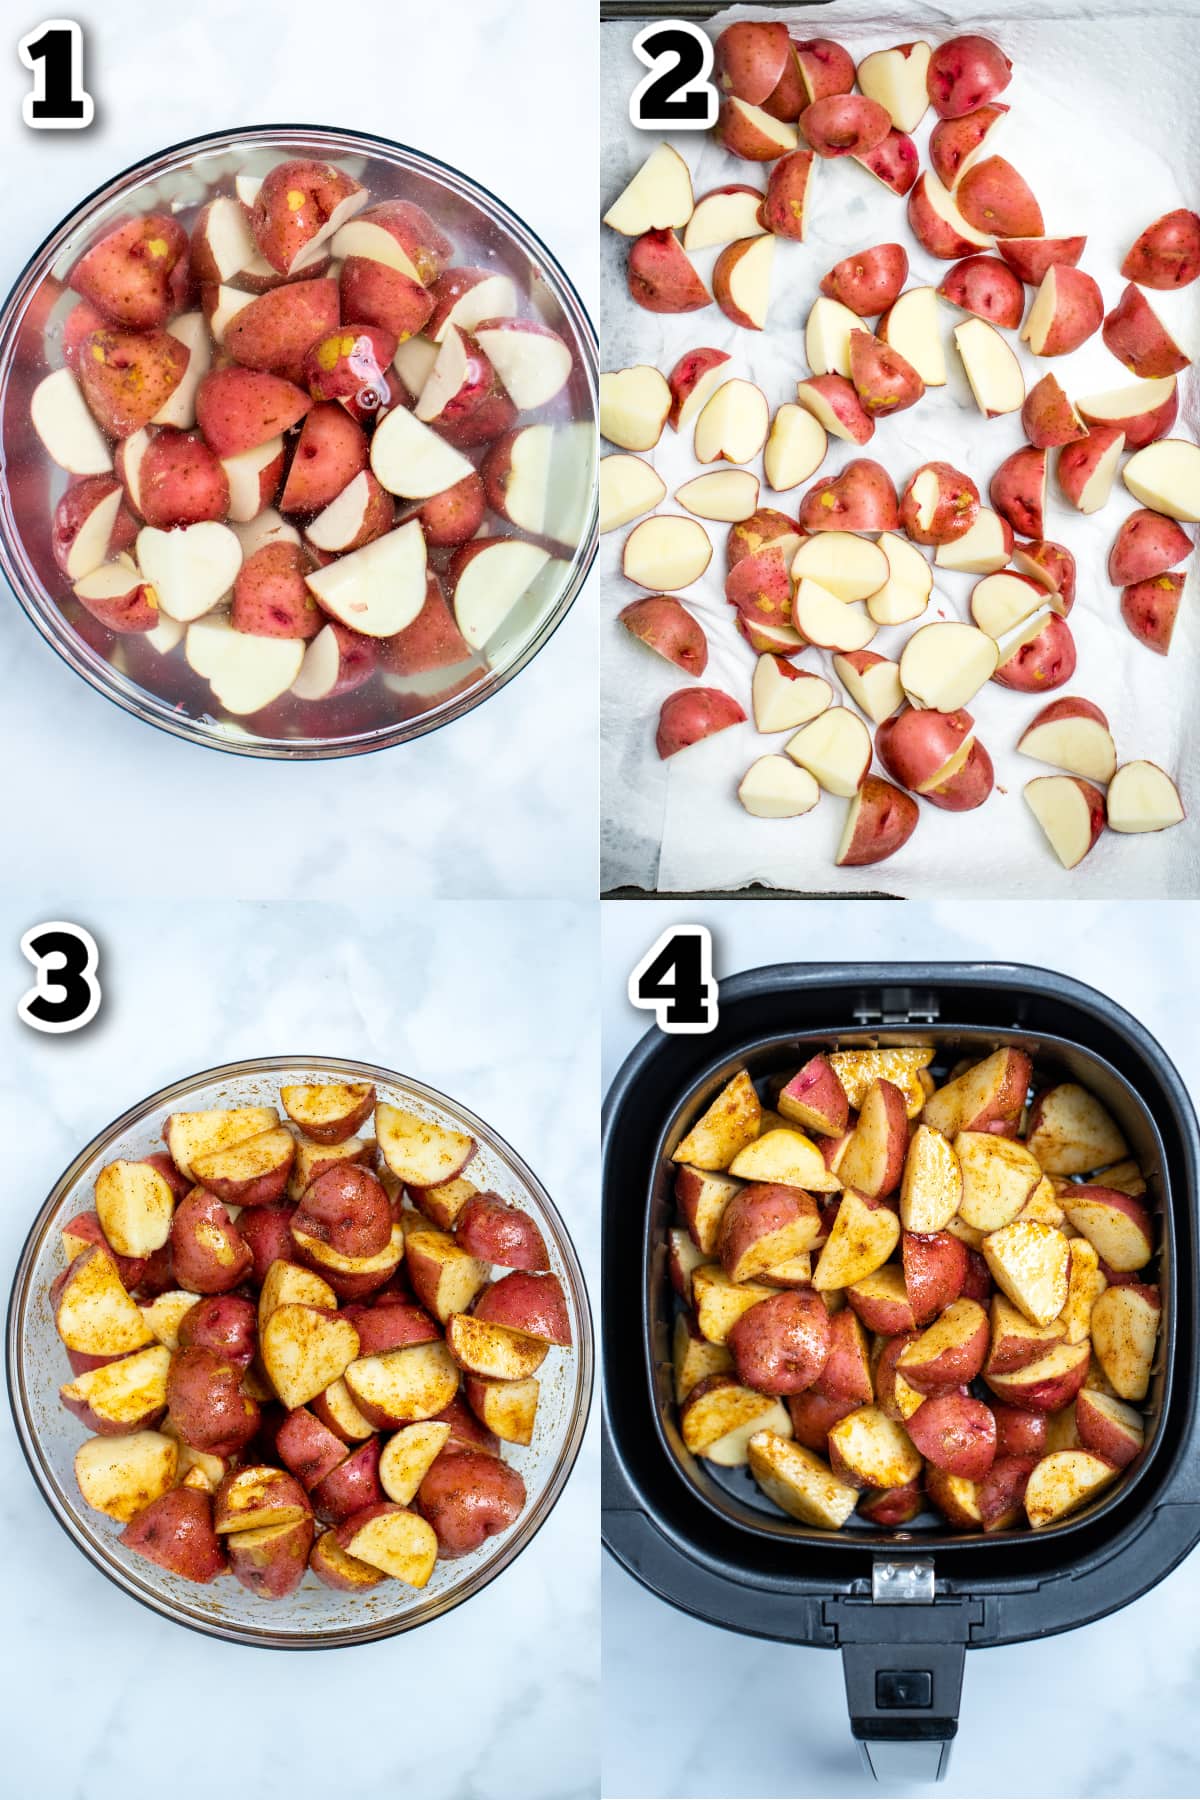 Step by step photos for how to make air fryer red potatoes.